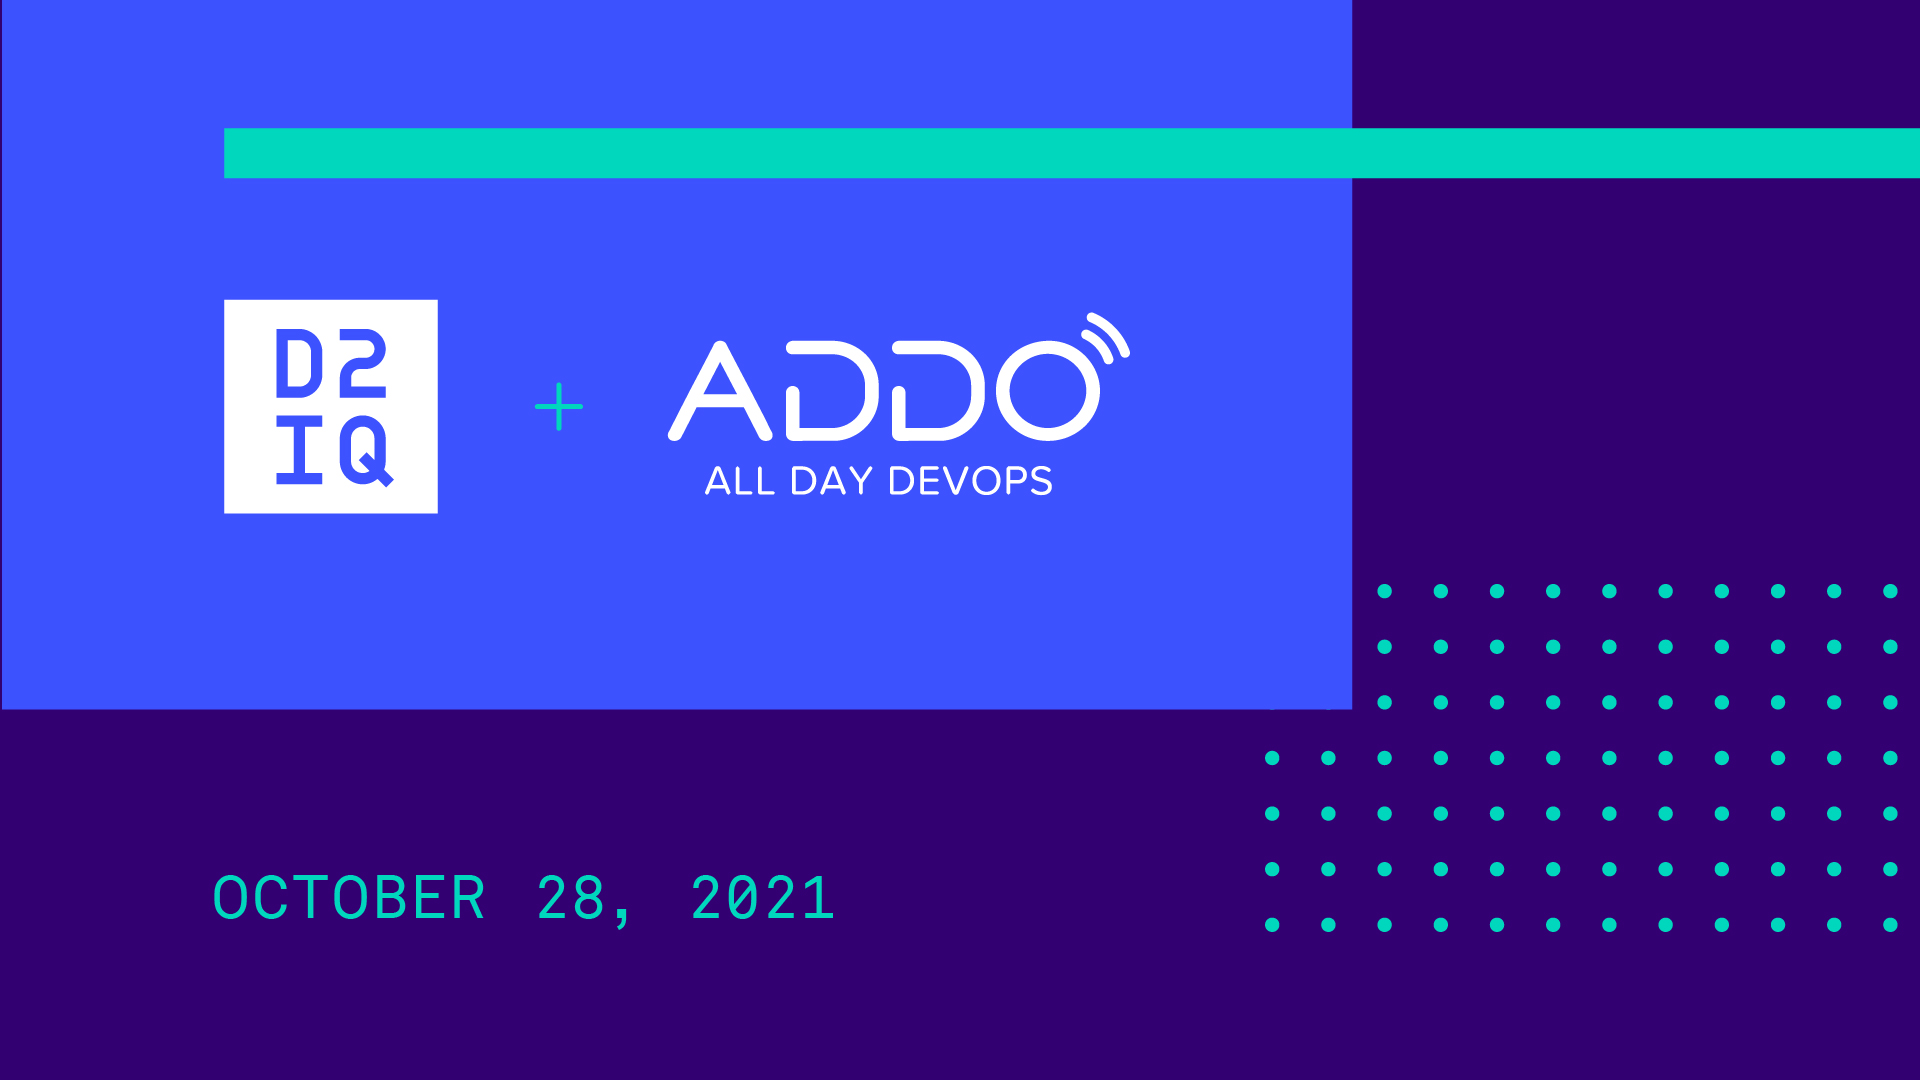 Join D2iQ: Top 4 All Day DevOps Reasons